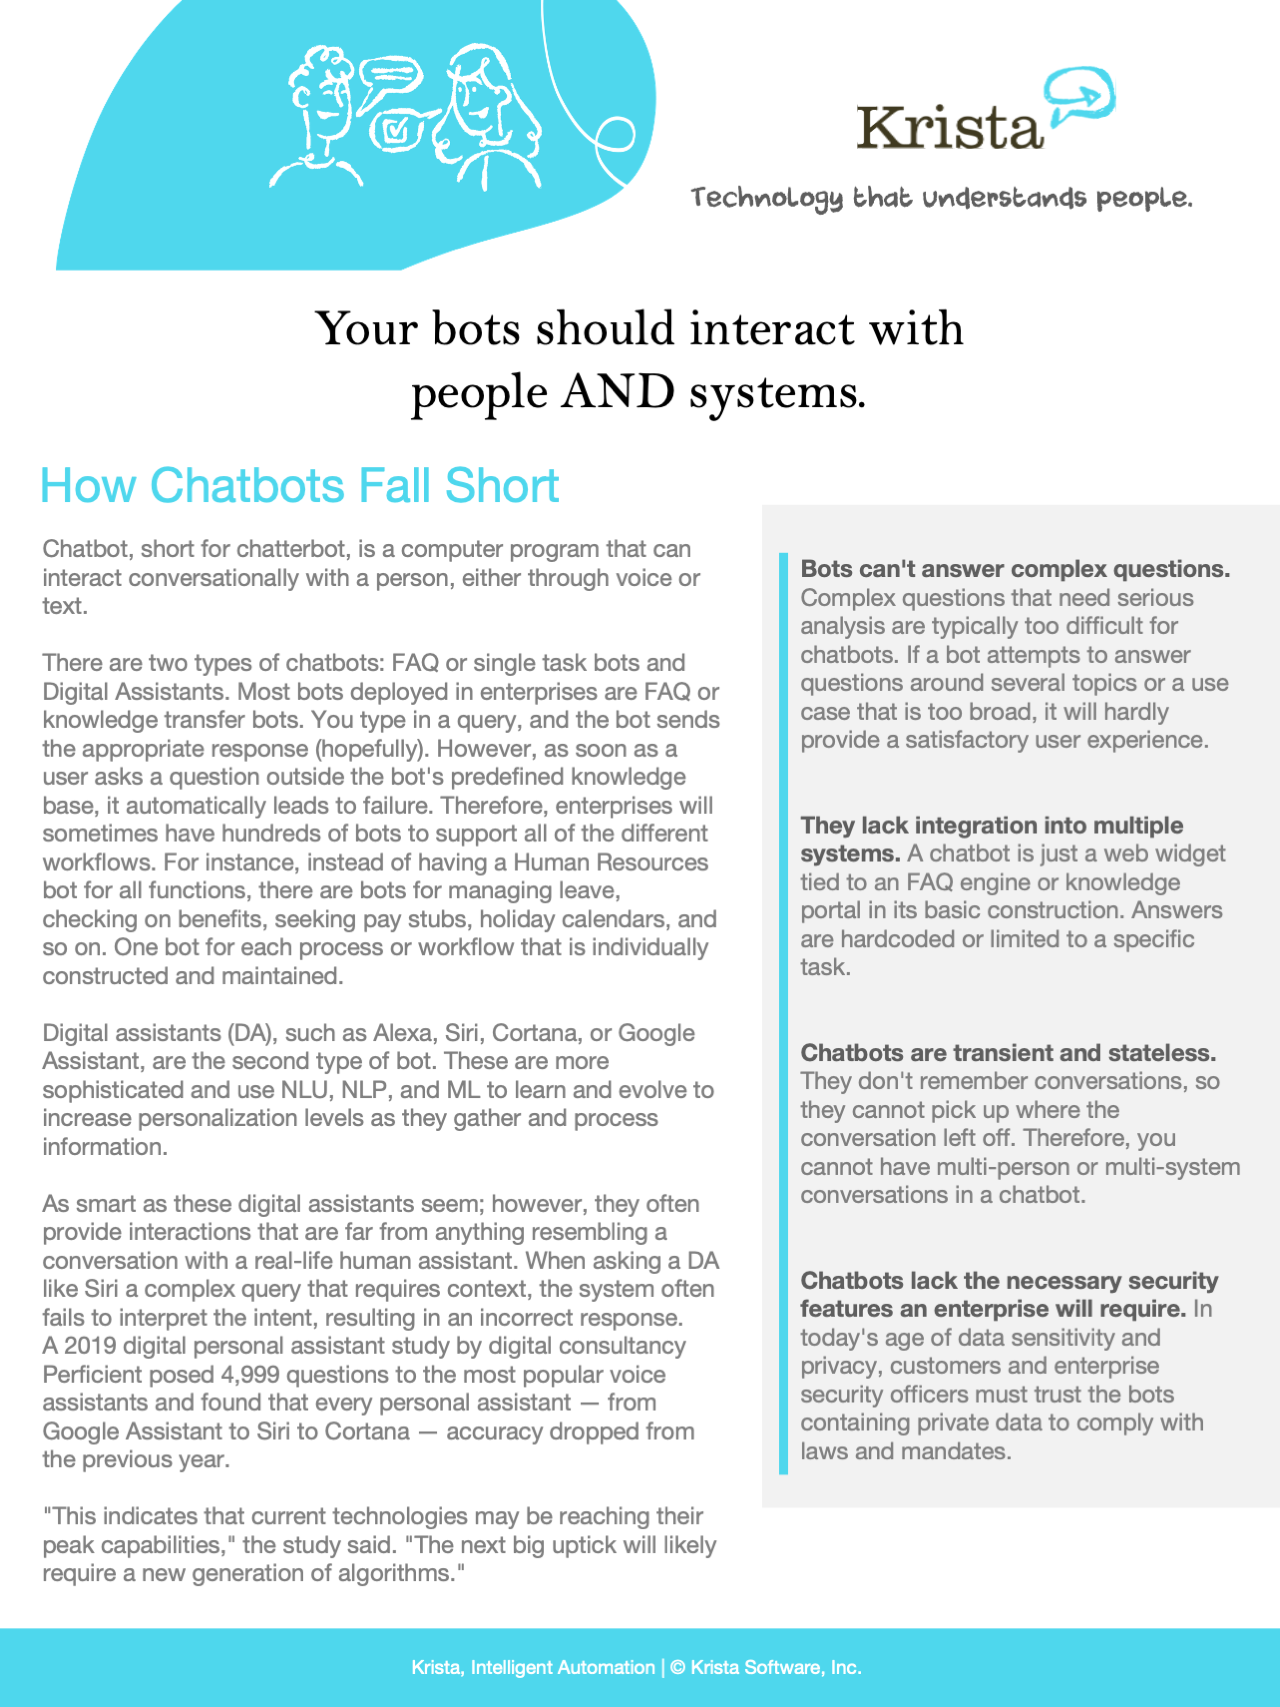 Limitations of Chatbots Cover